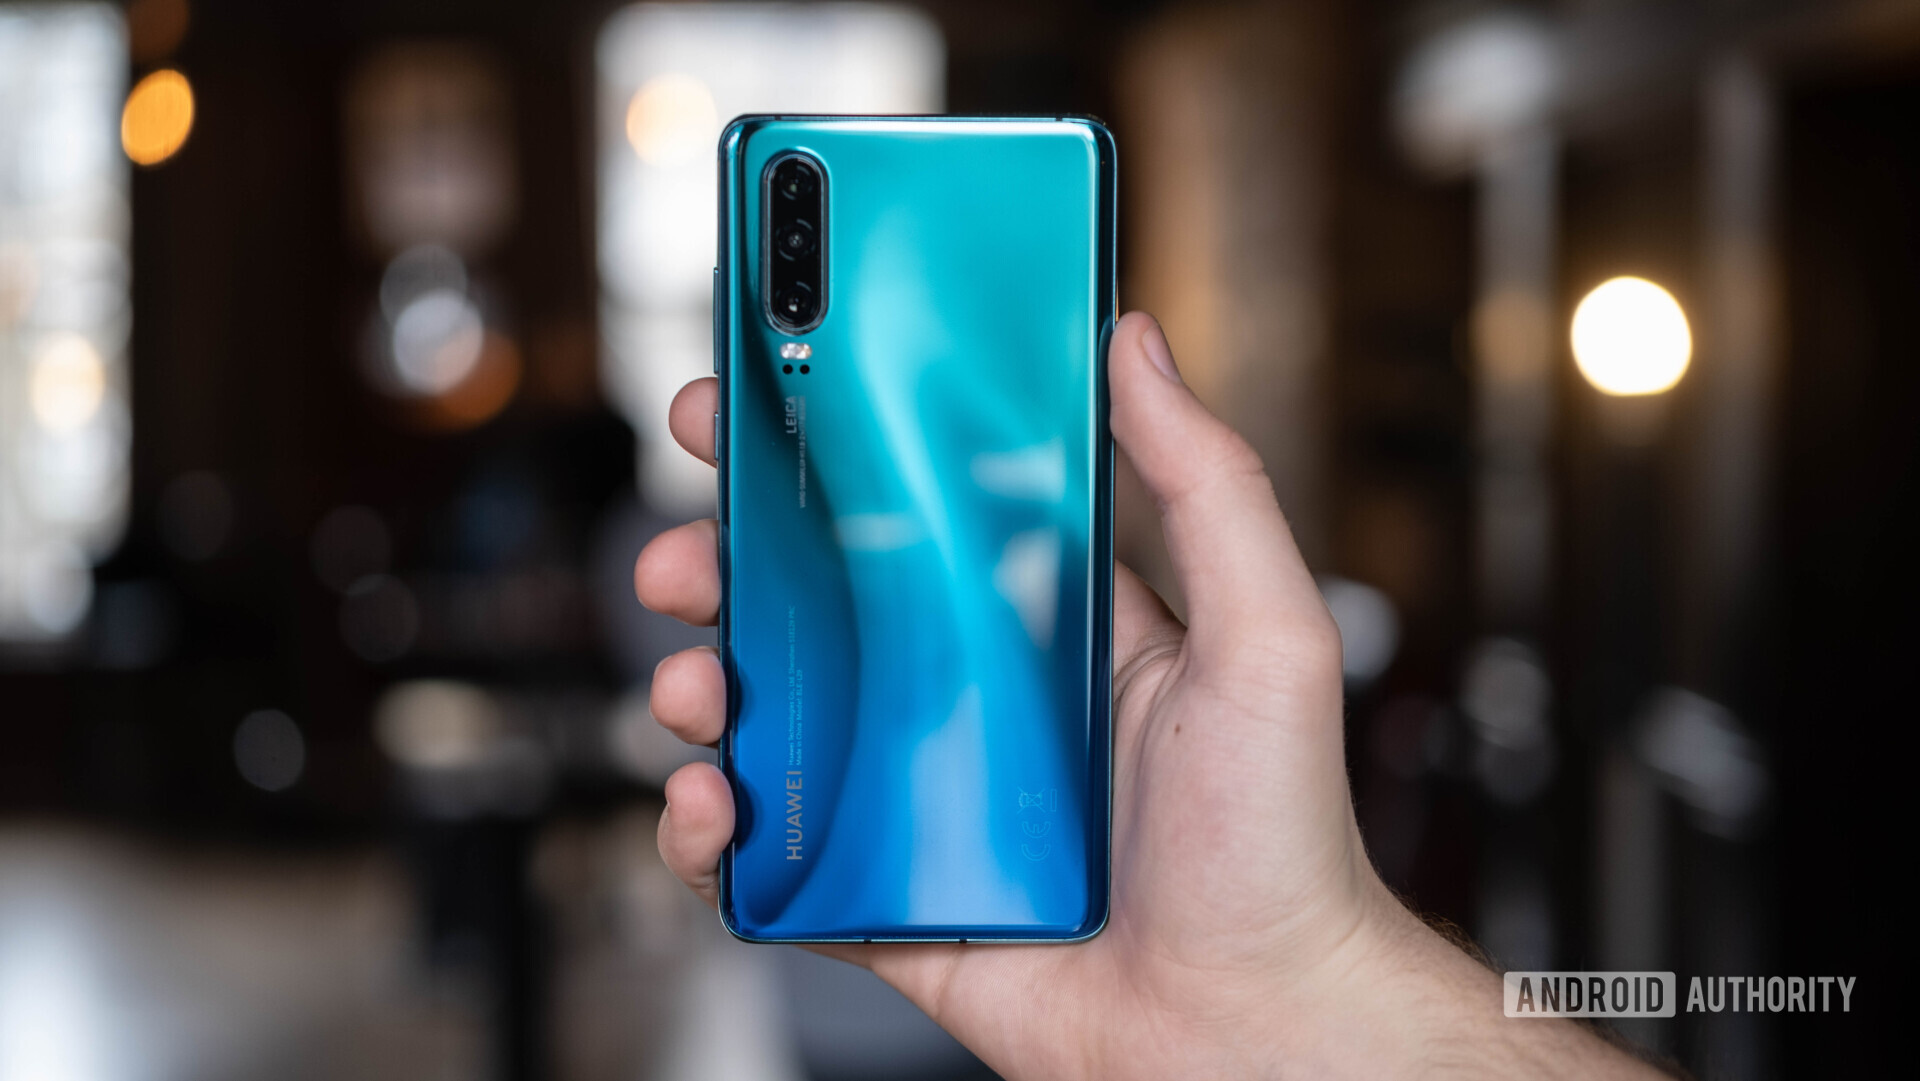 Huawei P30 and Huawei P30 Pro specs: It's all about that camera